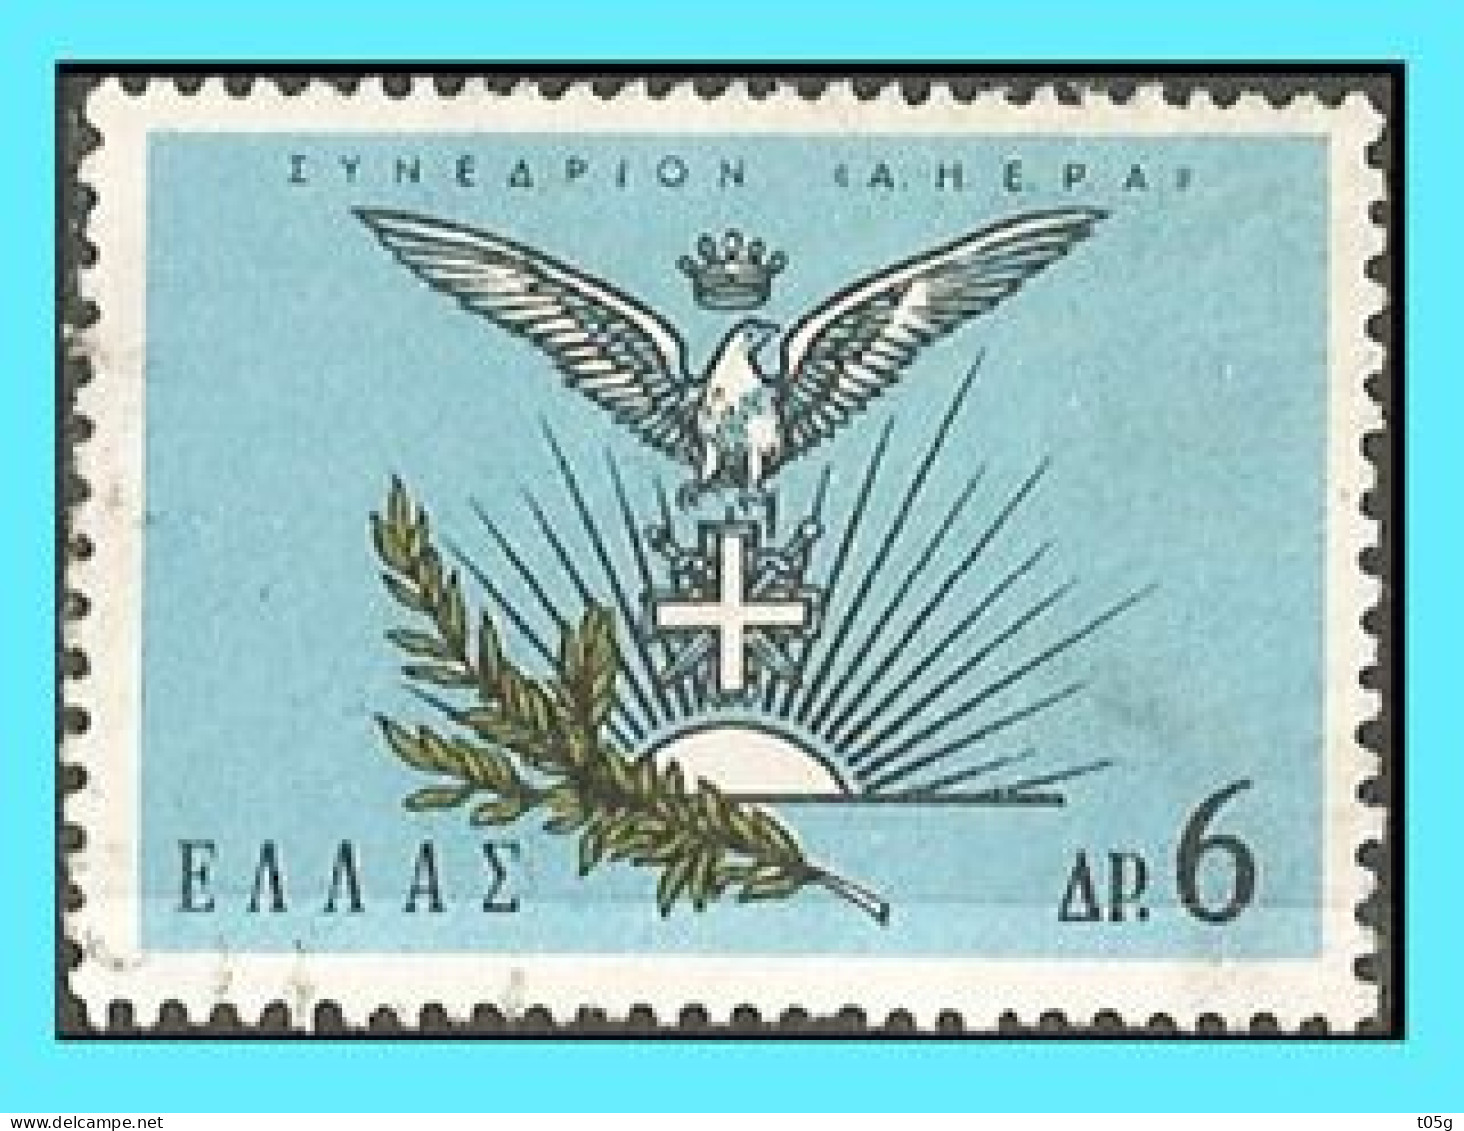 GREECE- GRECE - HELLAS 1965:   Complet  Set Used - Used Stamps